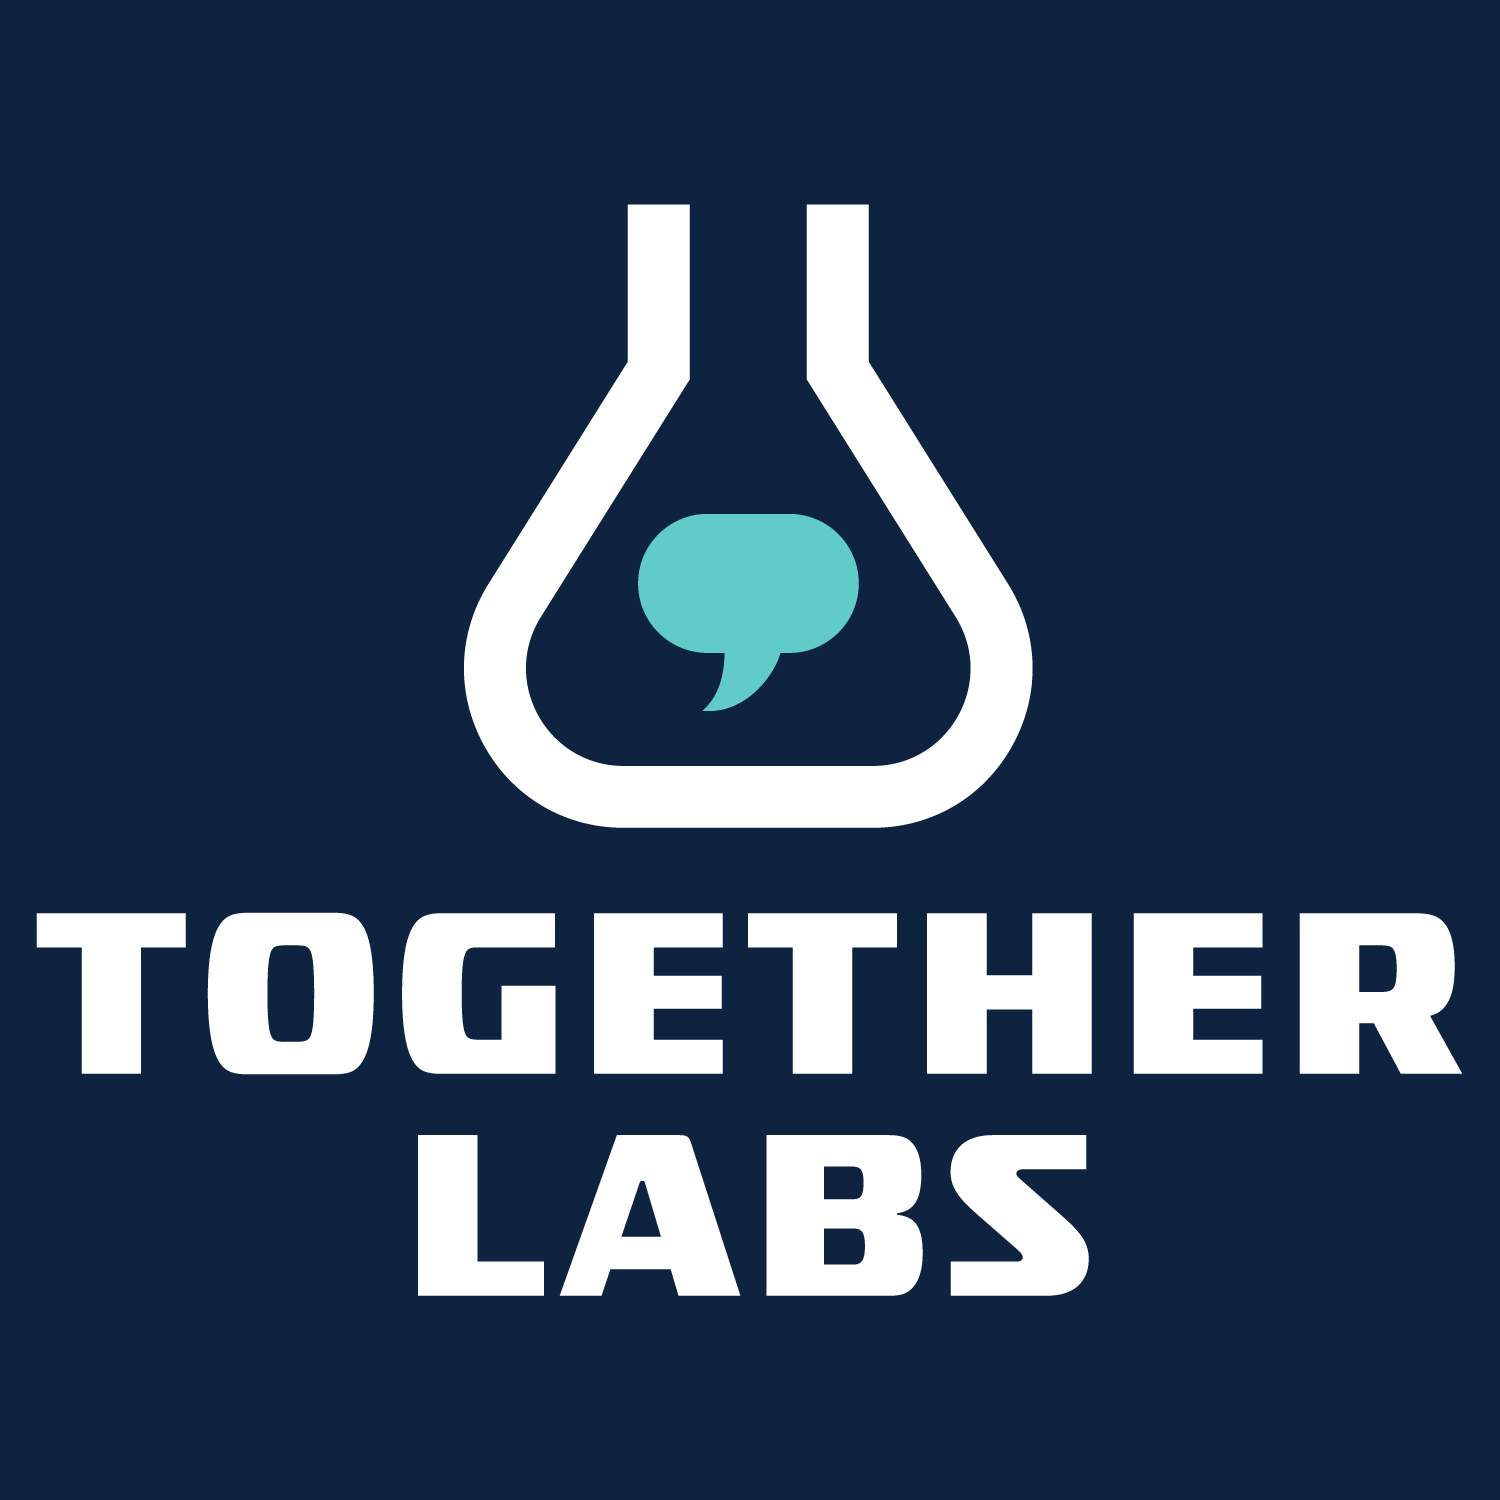 Together Labs